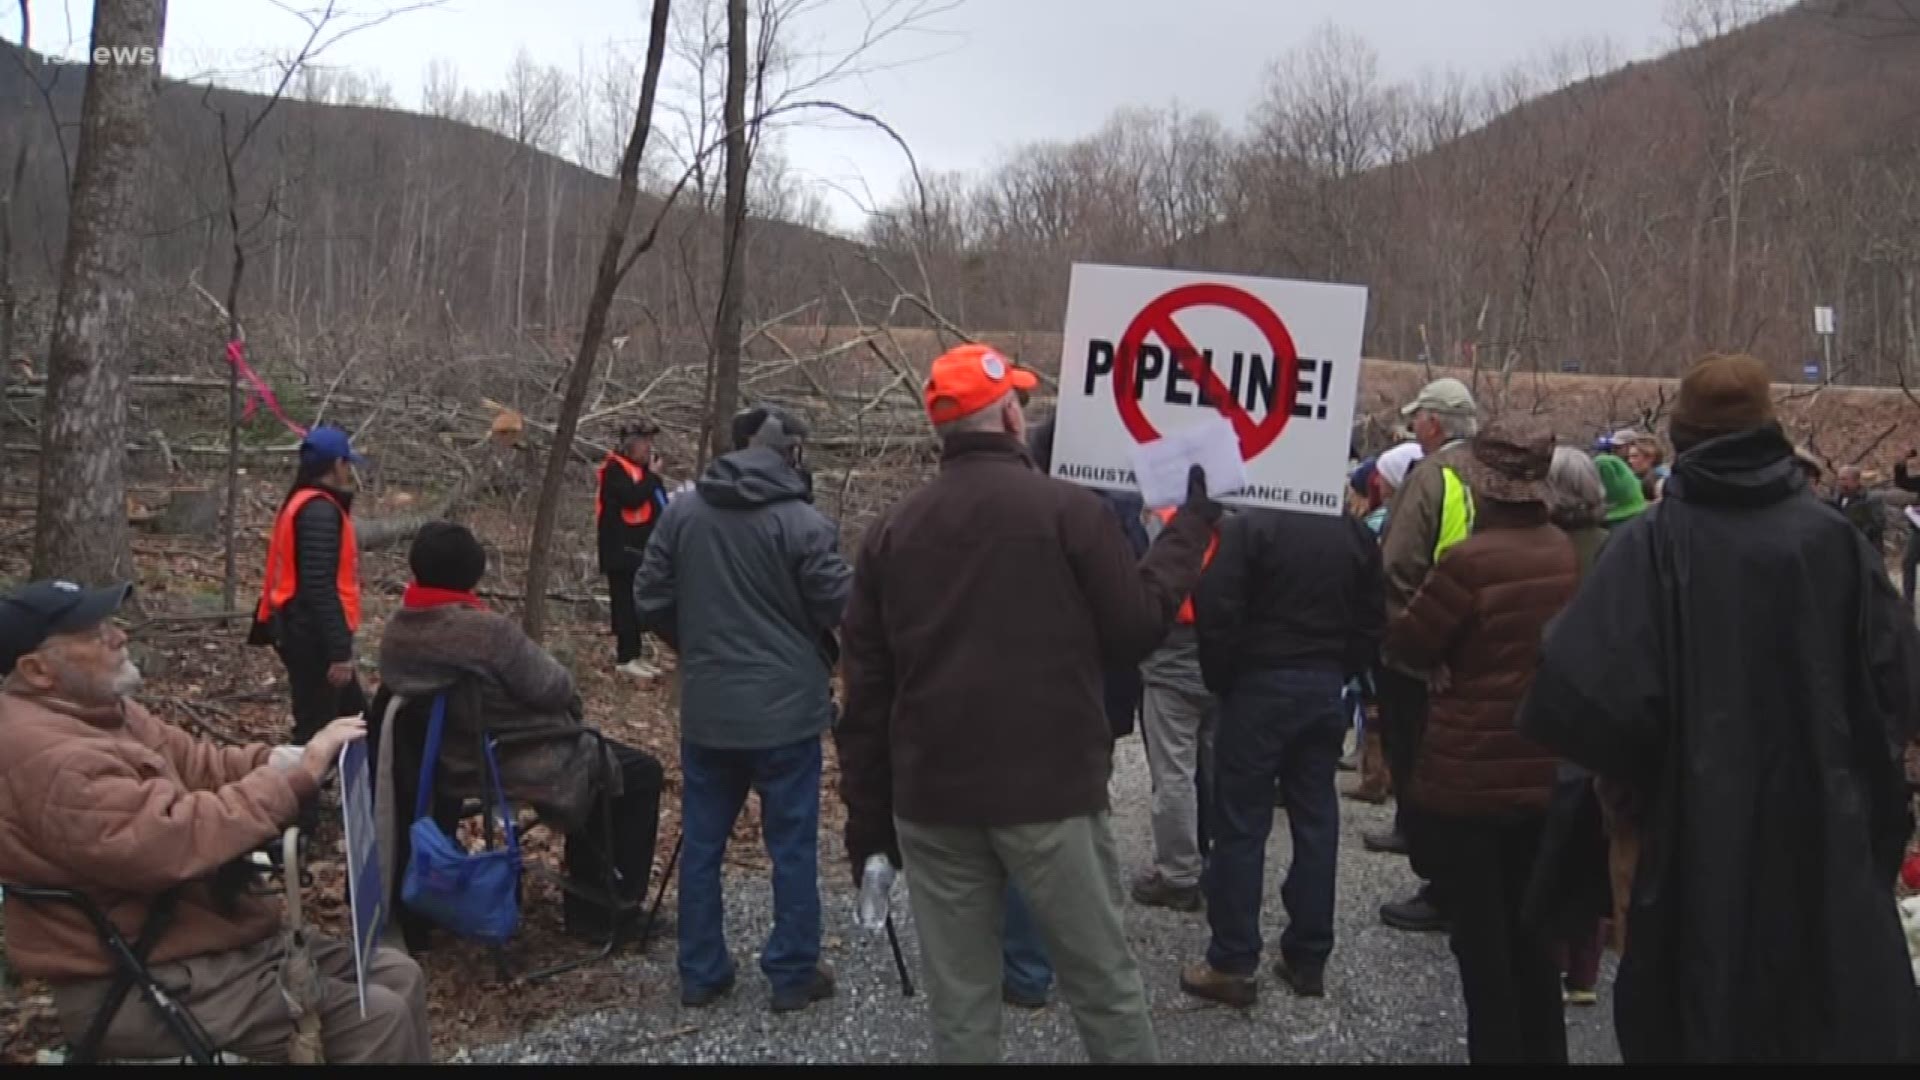 Suffolk City Council voted and approved on an Atlantic Coast Pipeline license agreement after the final public hearing.